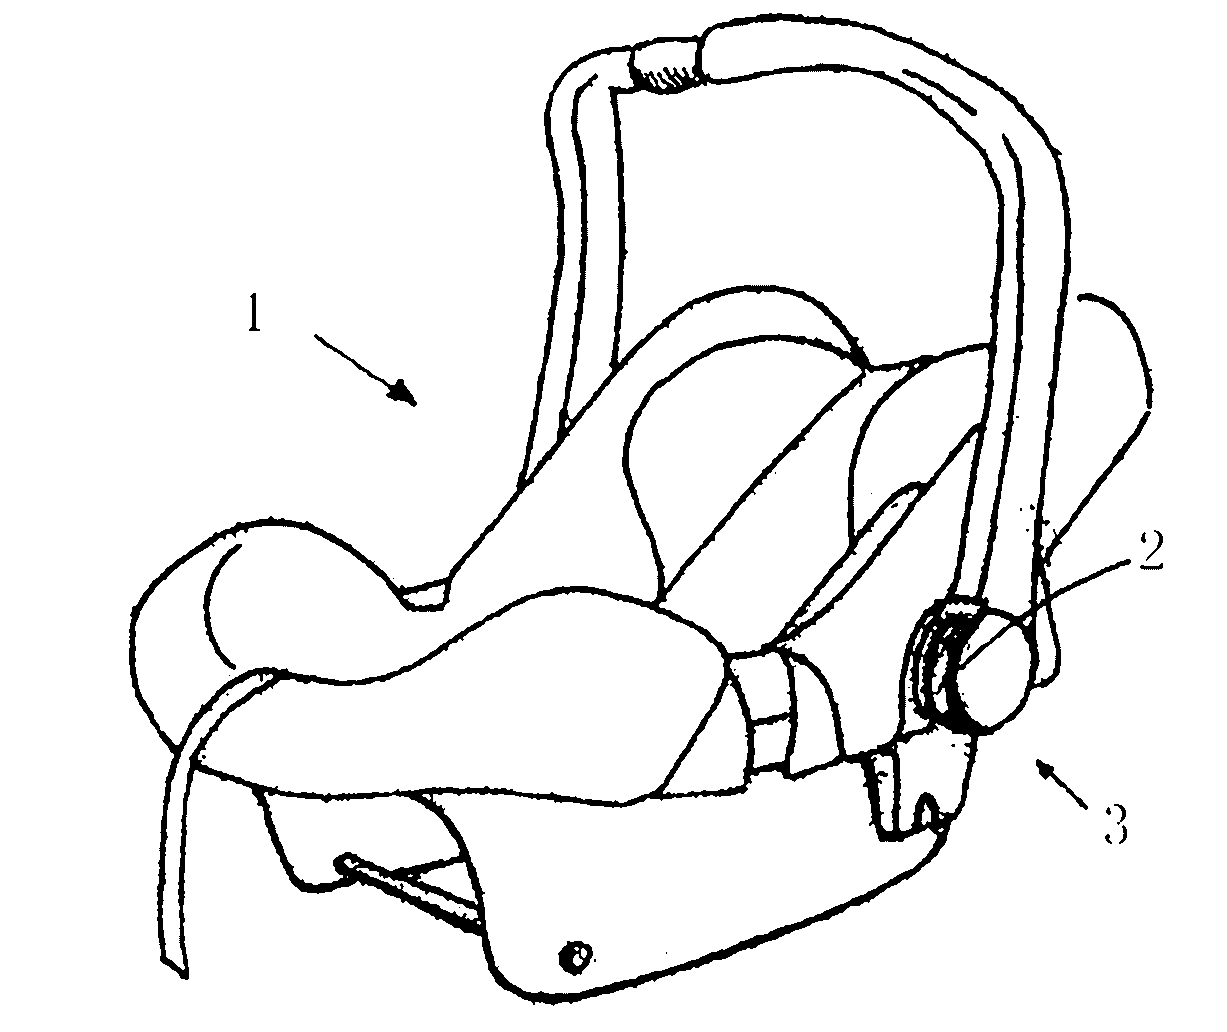 Child safety seat with side impact protection